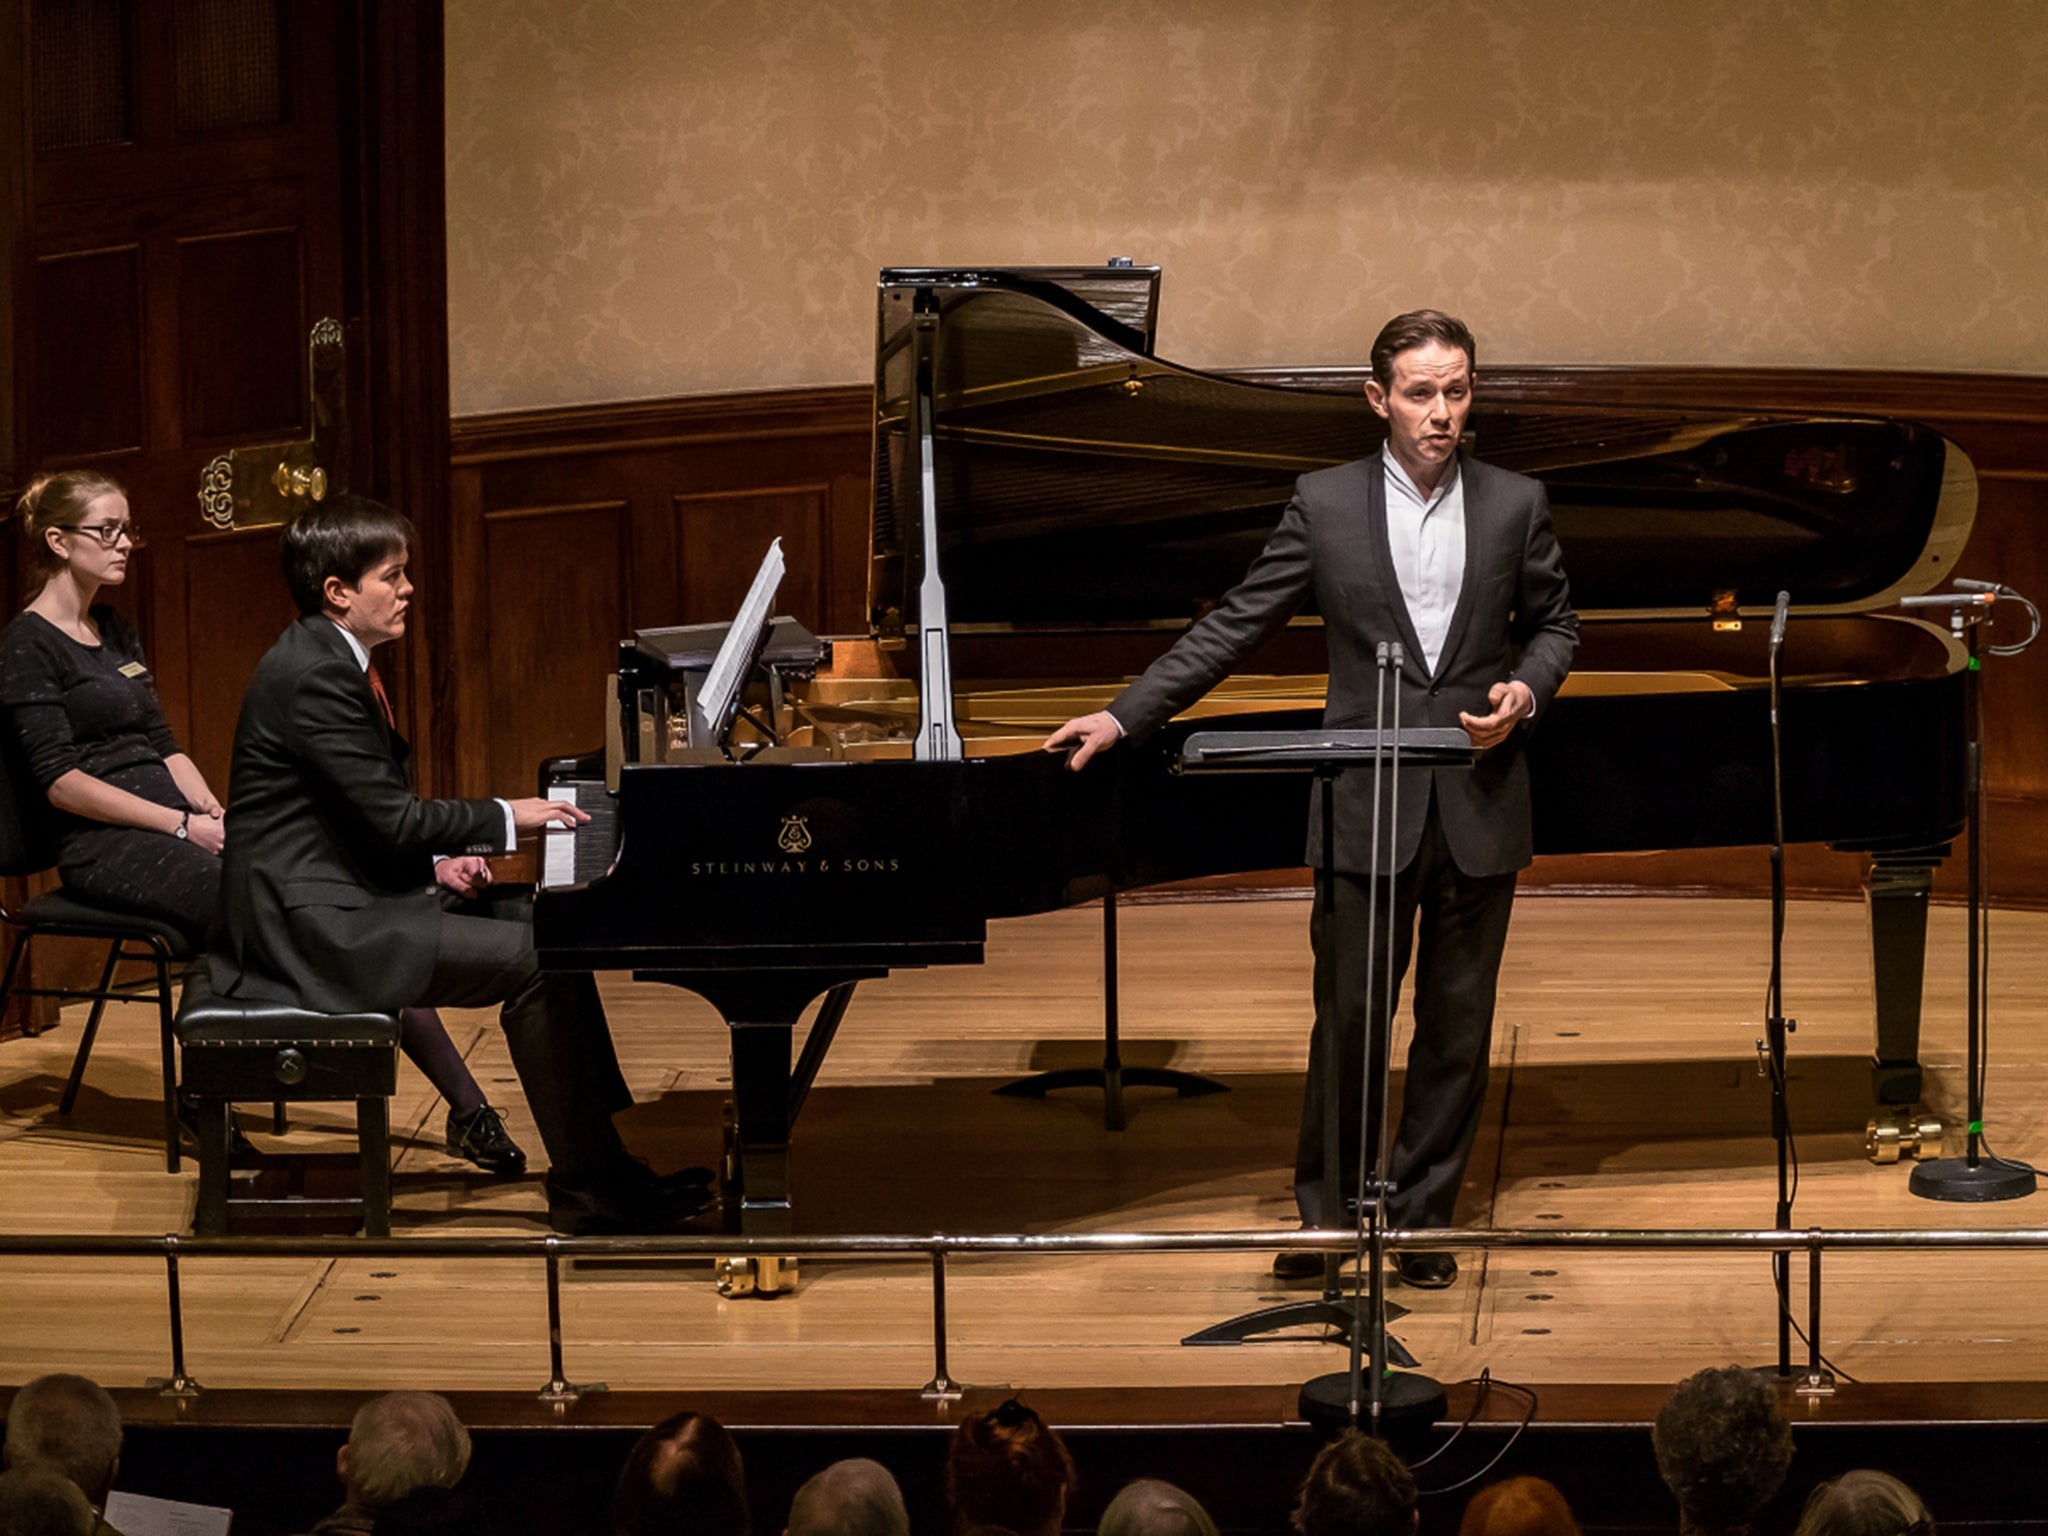 Daviesclaytonbaillieu Wigmore Hall Review Wonderful Singers And Excellent Accompanist